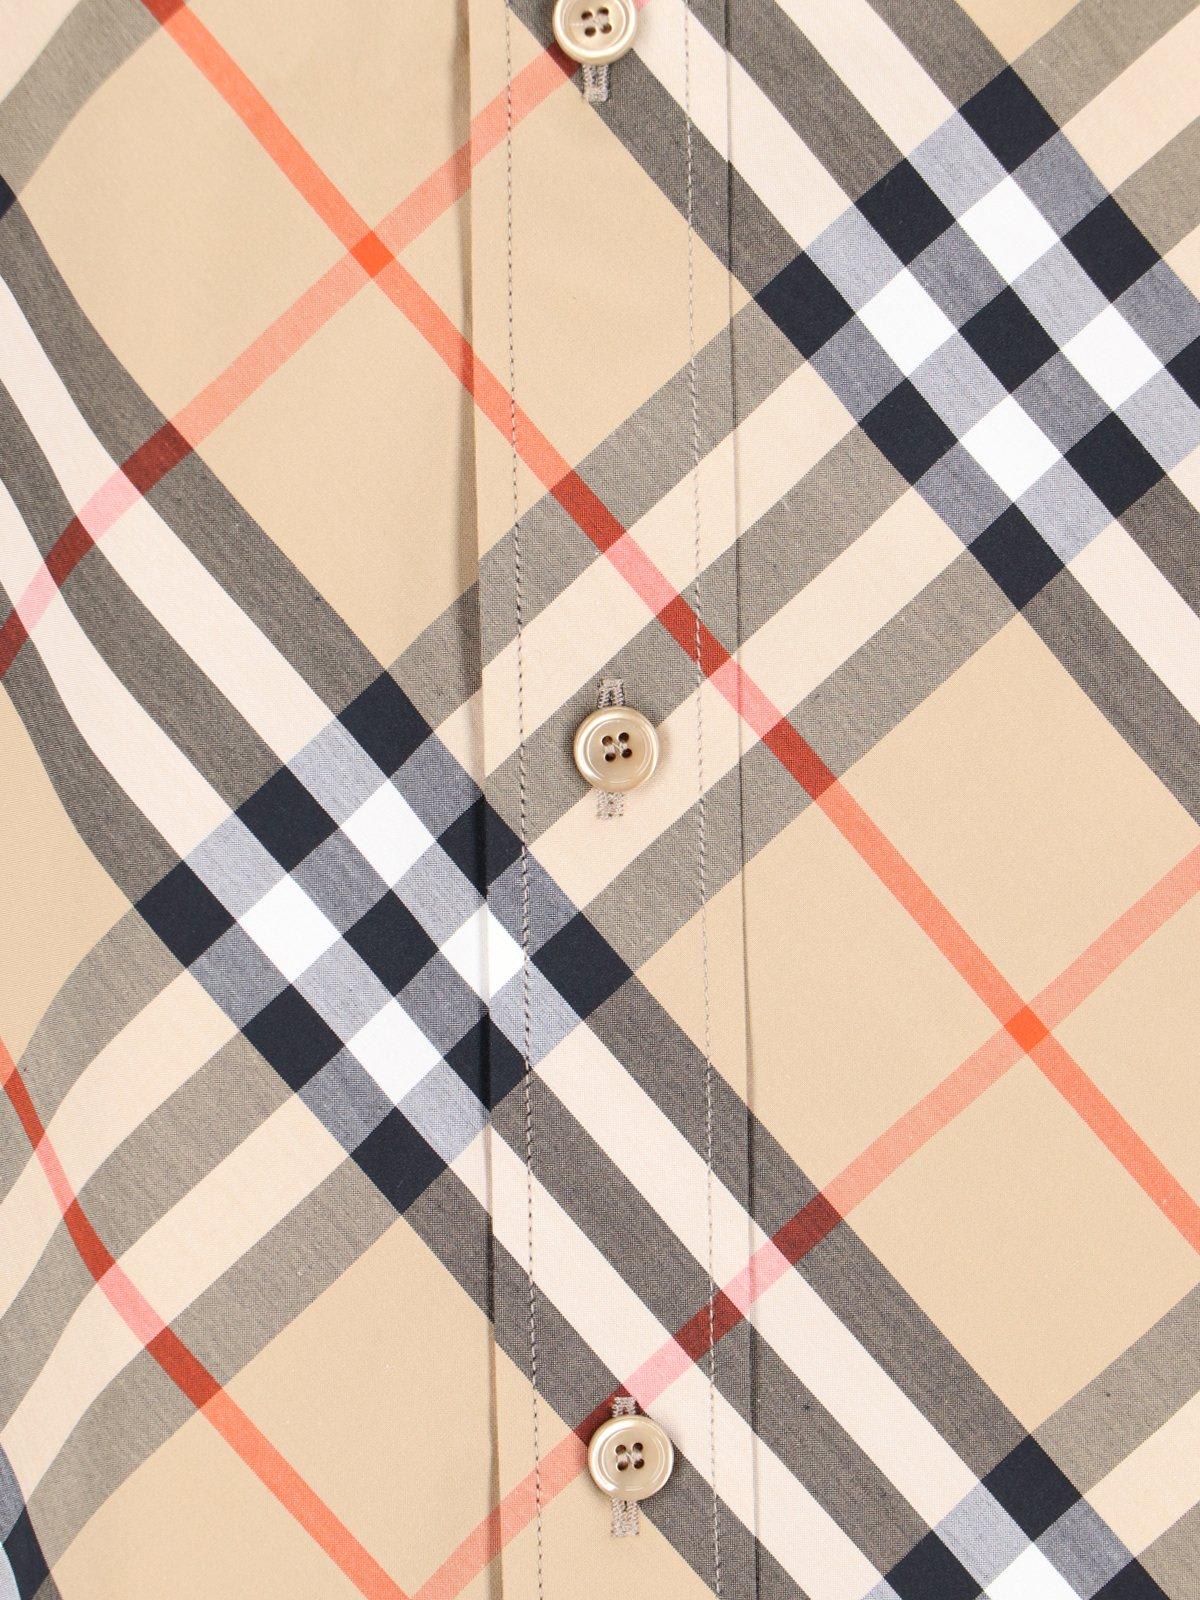 Shop Burberry Short Sleeved Checked Shirt In Sand Ip Check